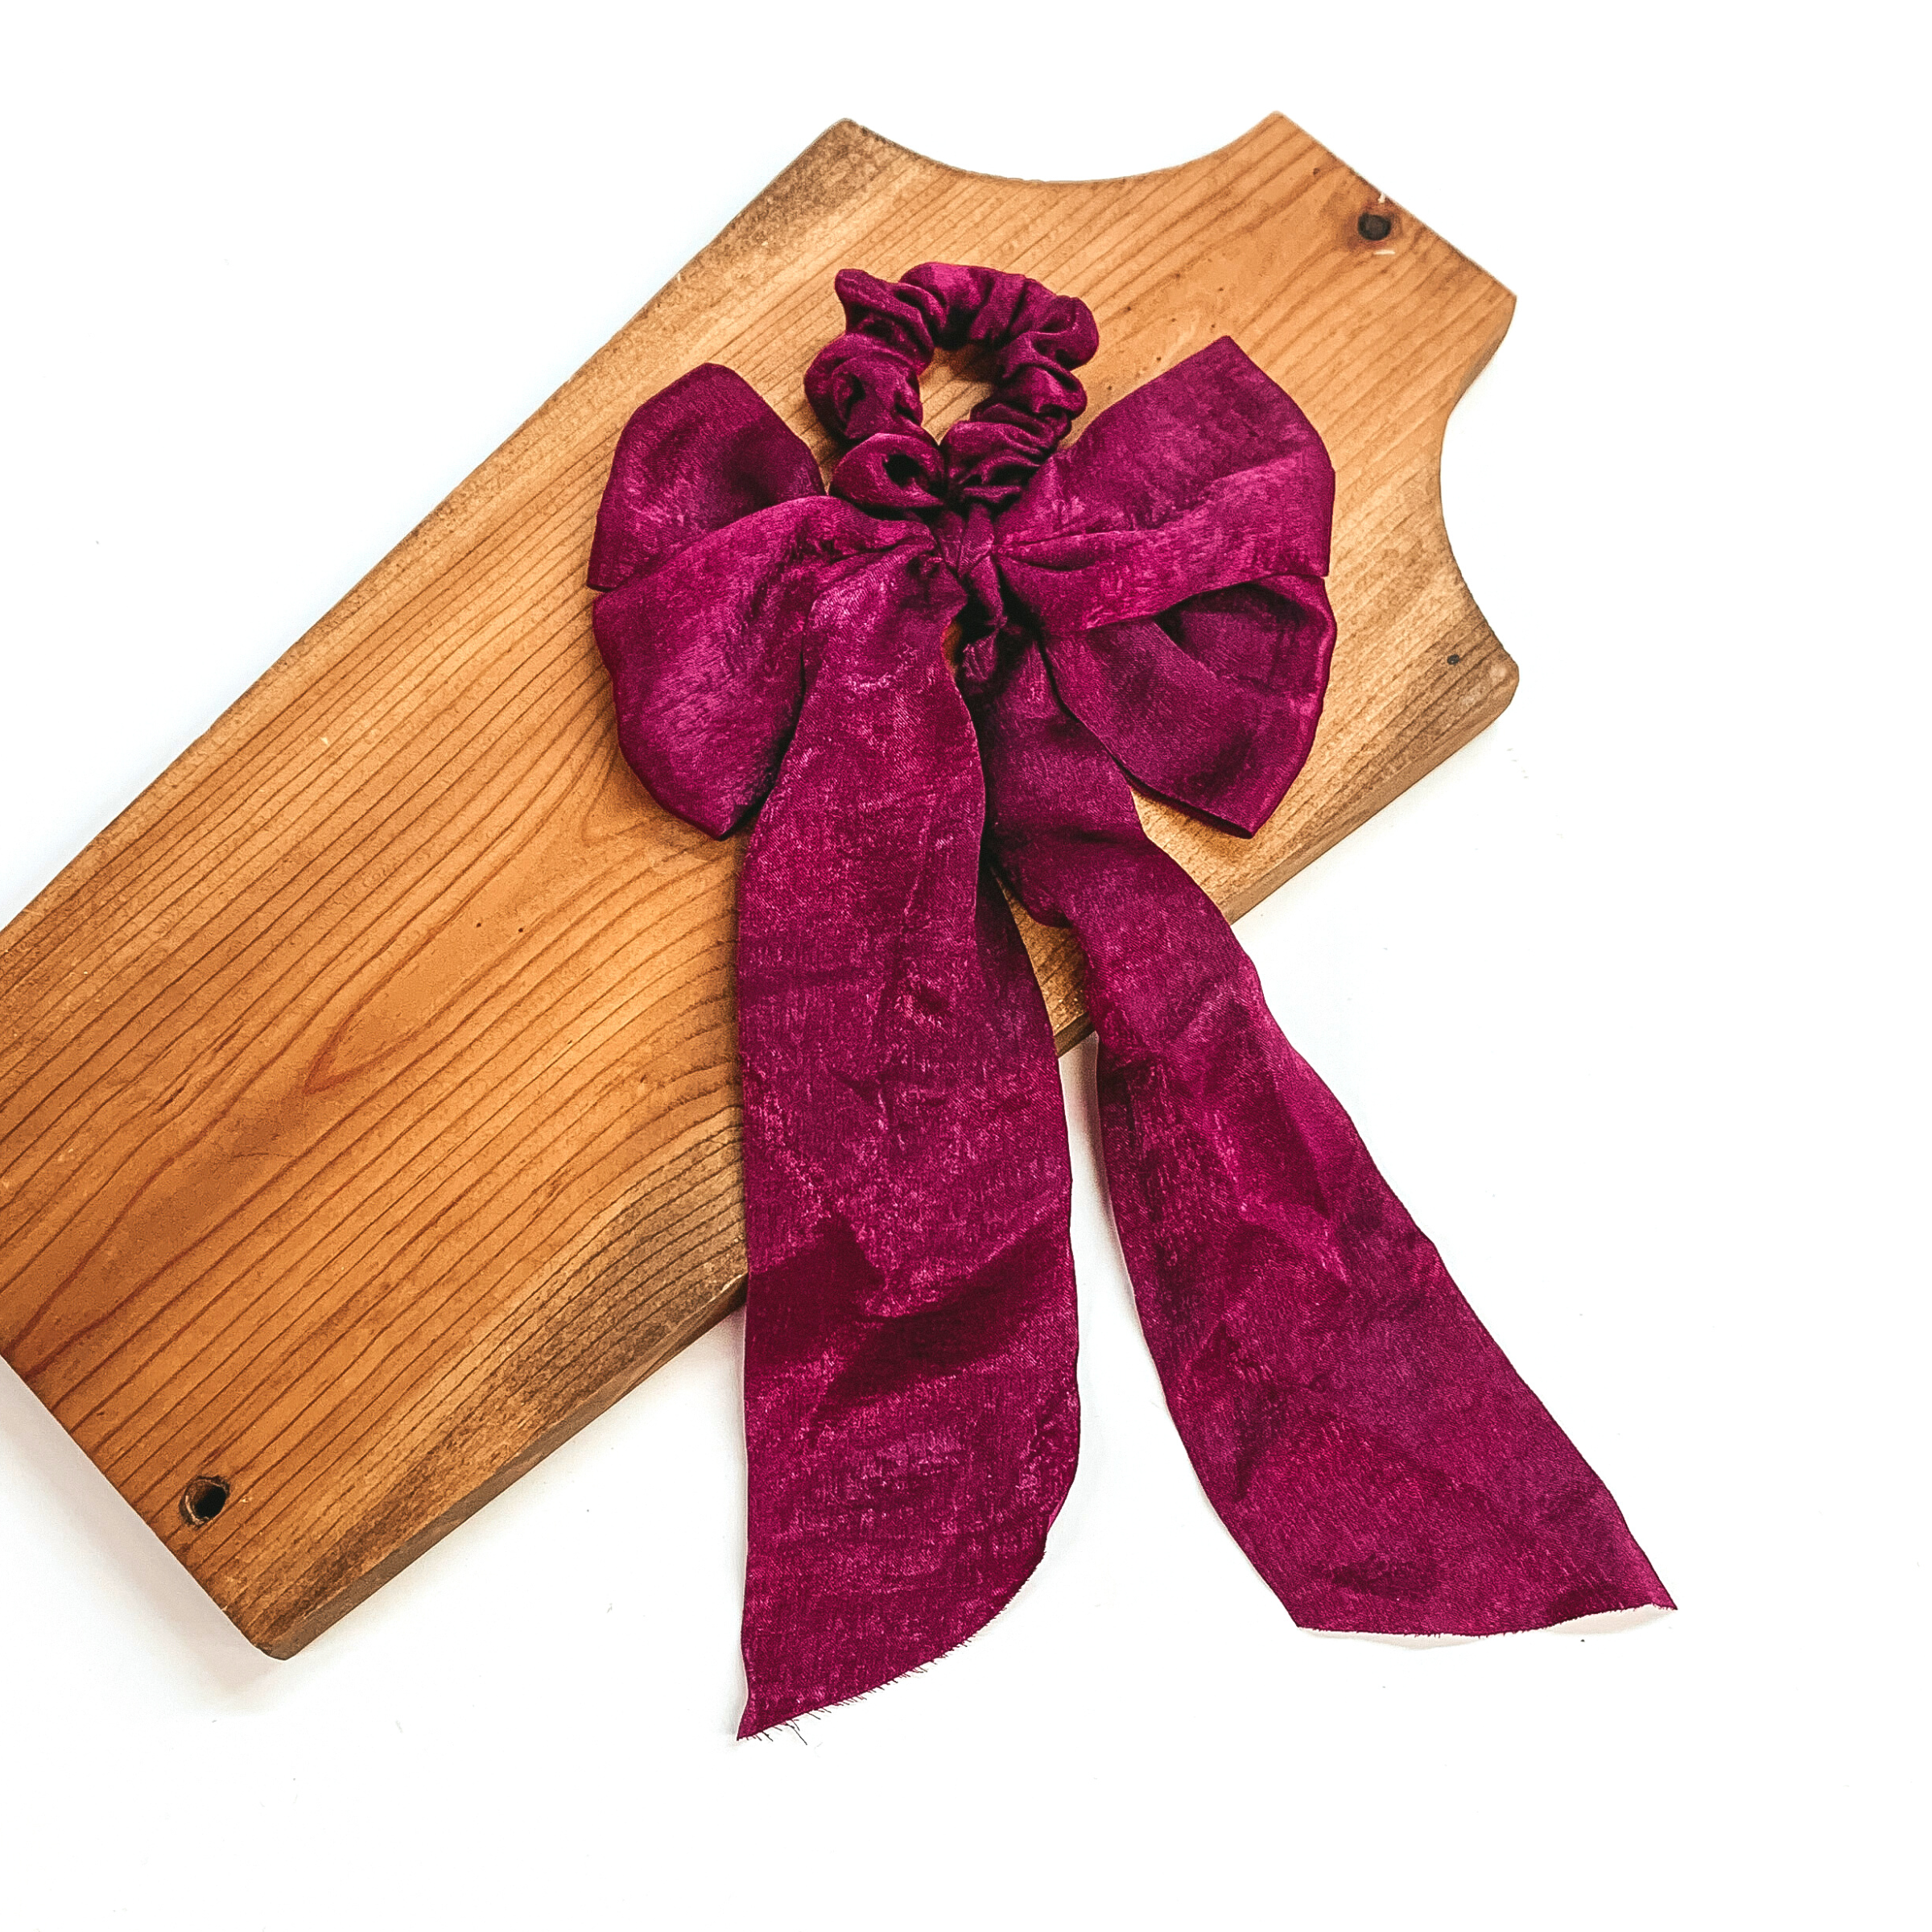 This is a maroon satin scrunchie with a long bow, this scrunchie is taken on  a brown necklace board and on a white background.